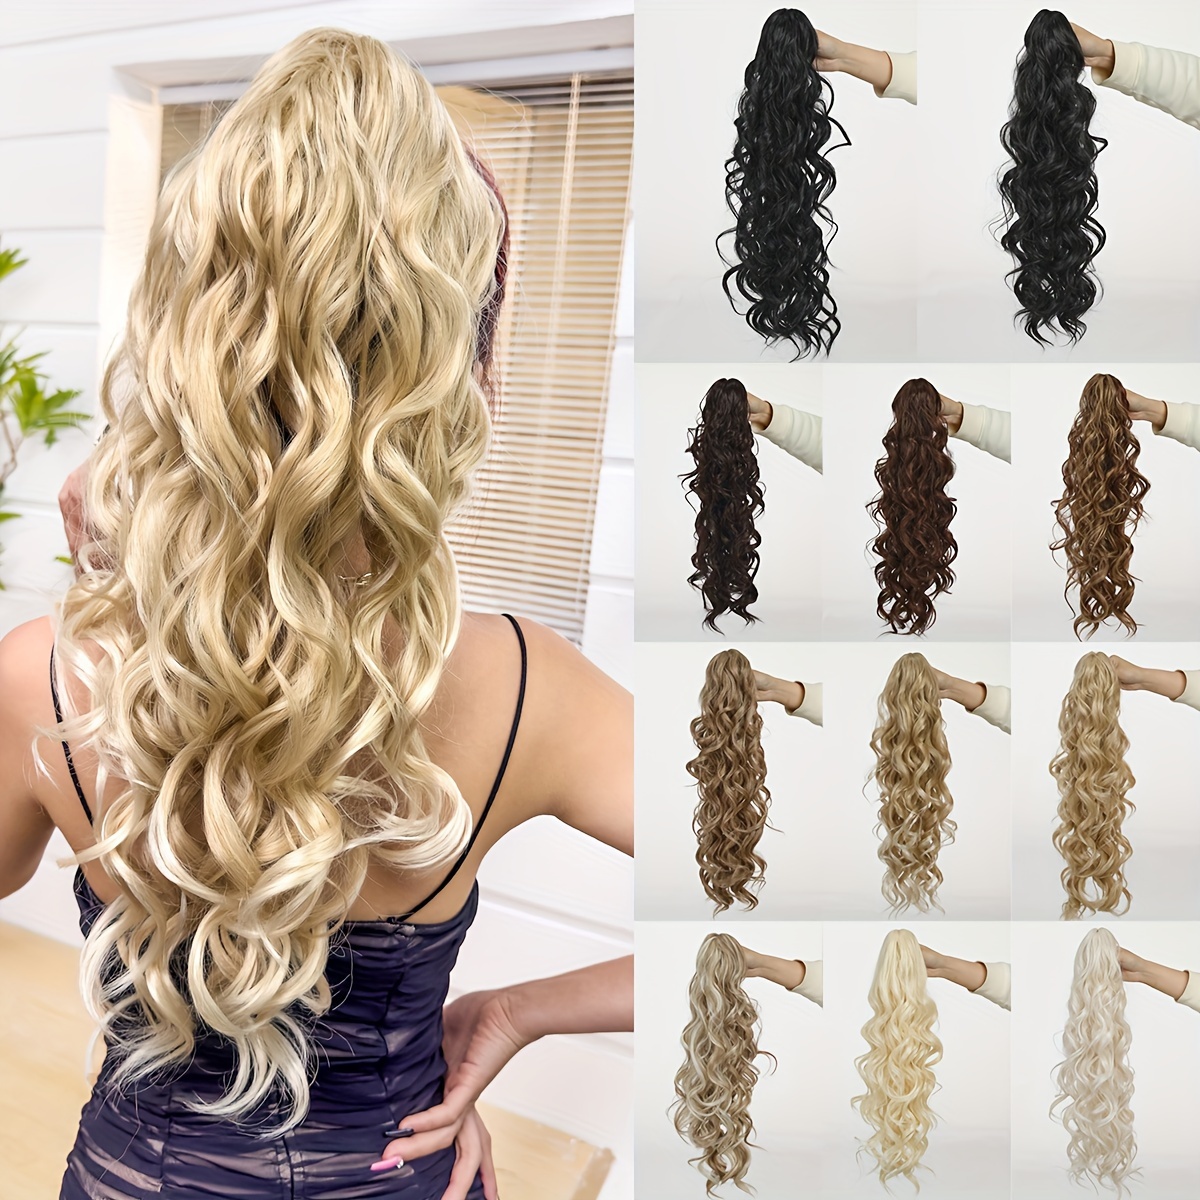 

Claw Ponytail Long Curly Wavy Ponytail Extensions Synthetic Clip In Hair Extensions Elegant Natural Looking For Daily Use Hair Accessories